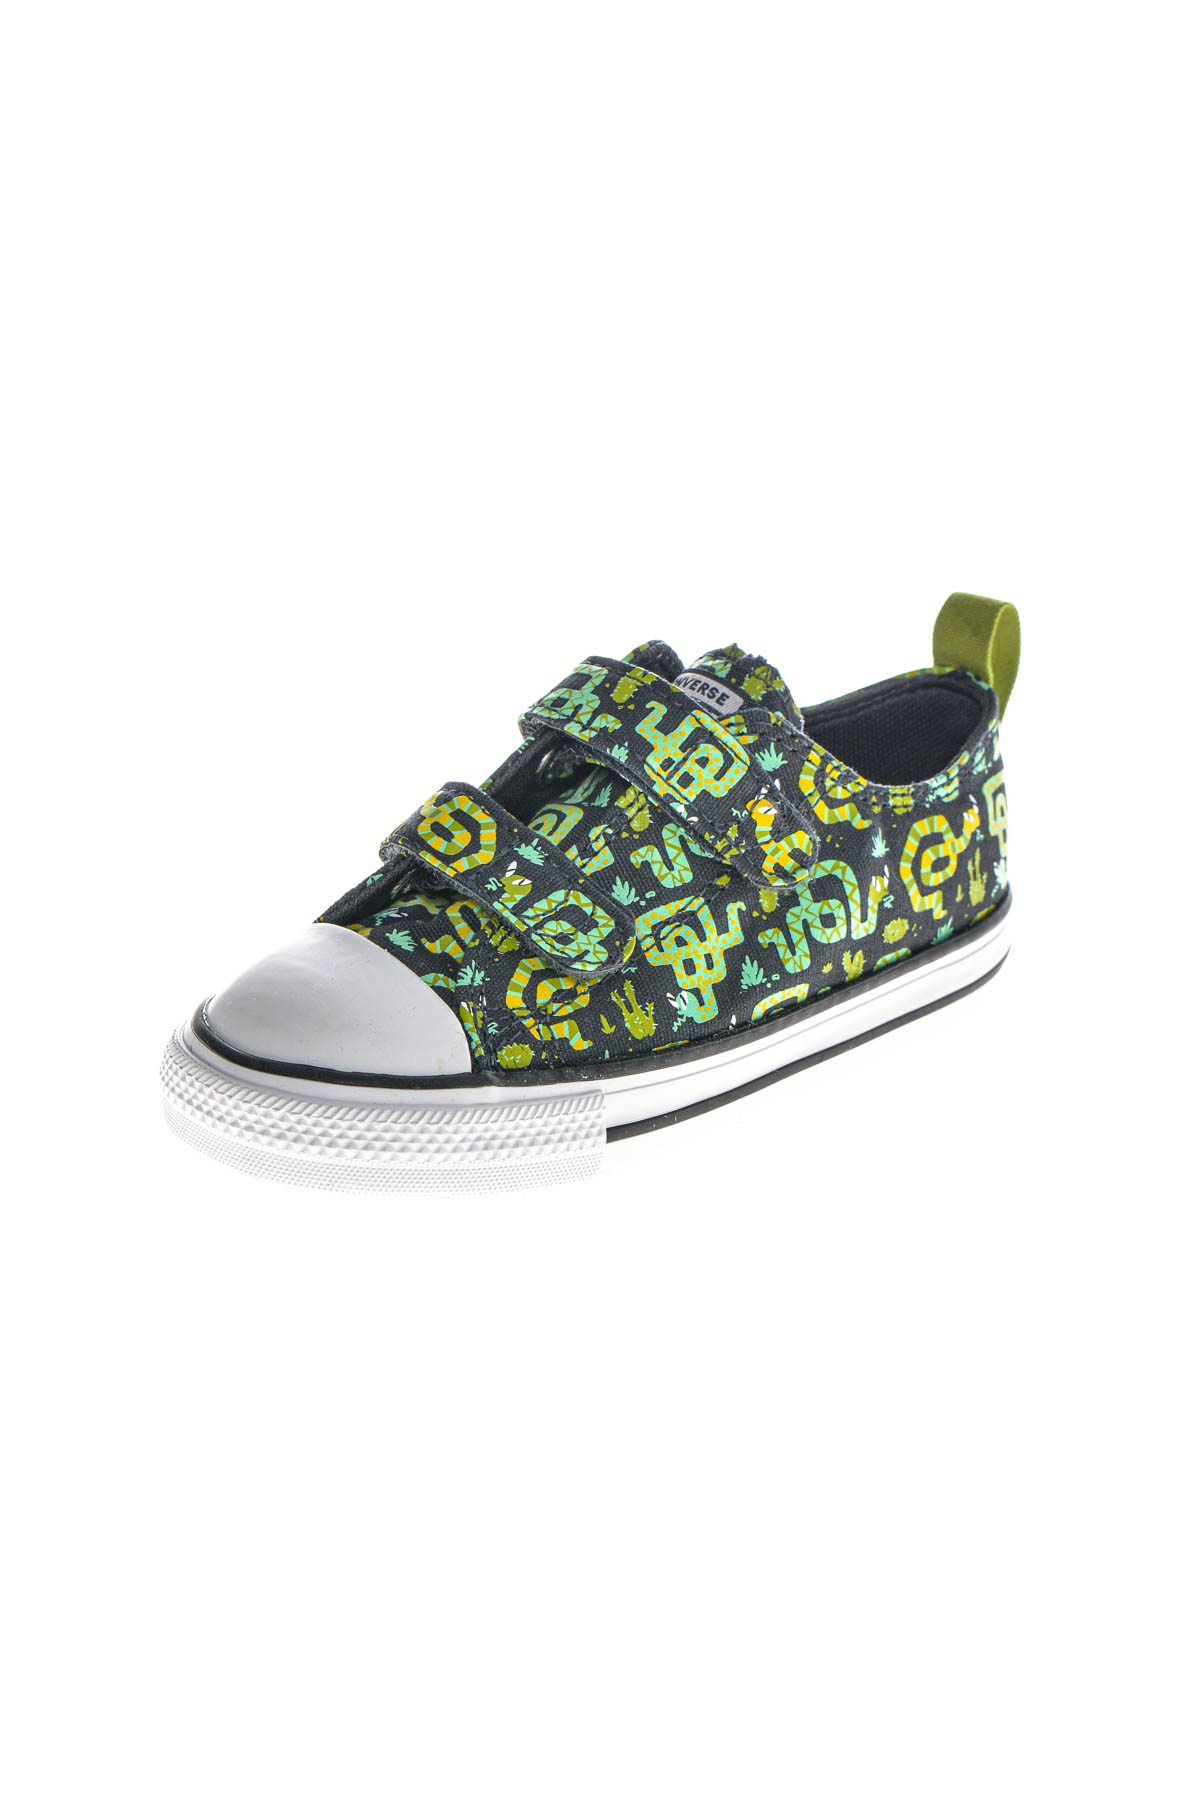 Sneakers for boys - Converse - 1